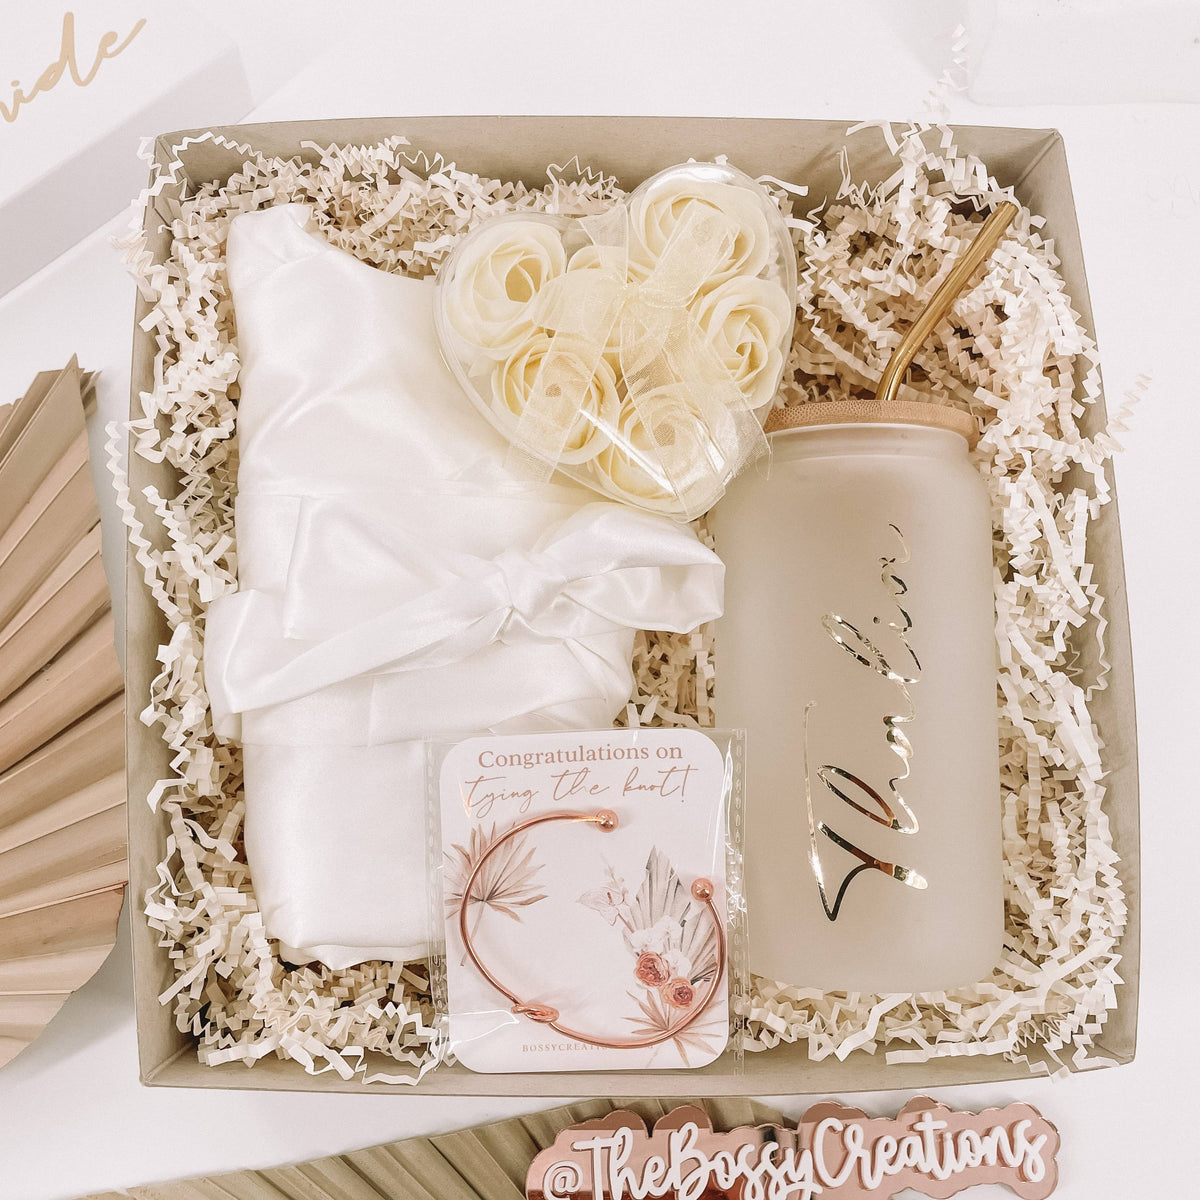 The Perfect gift for Brides this Wedding Season – Introducing Fizzy Goblet's  Jutti Bridal Box - The Maharani Diaries